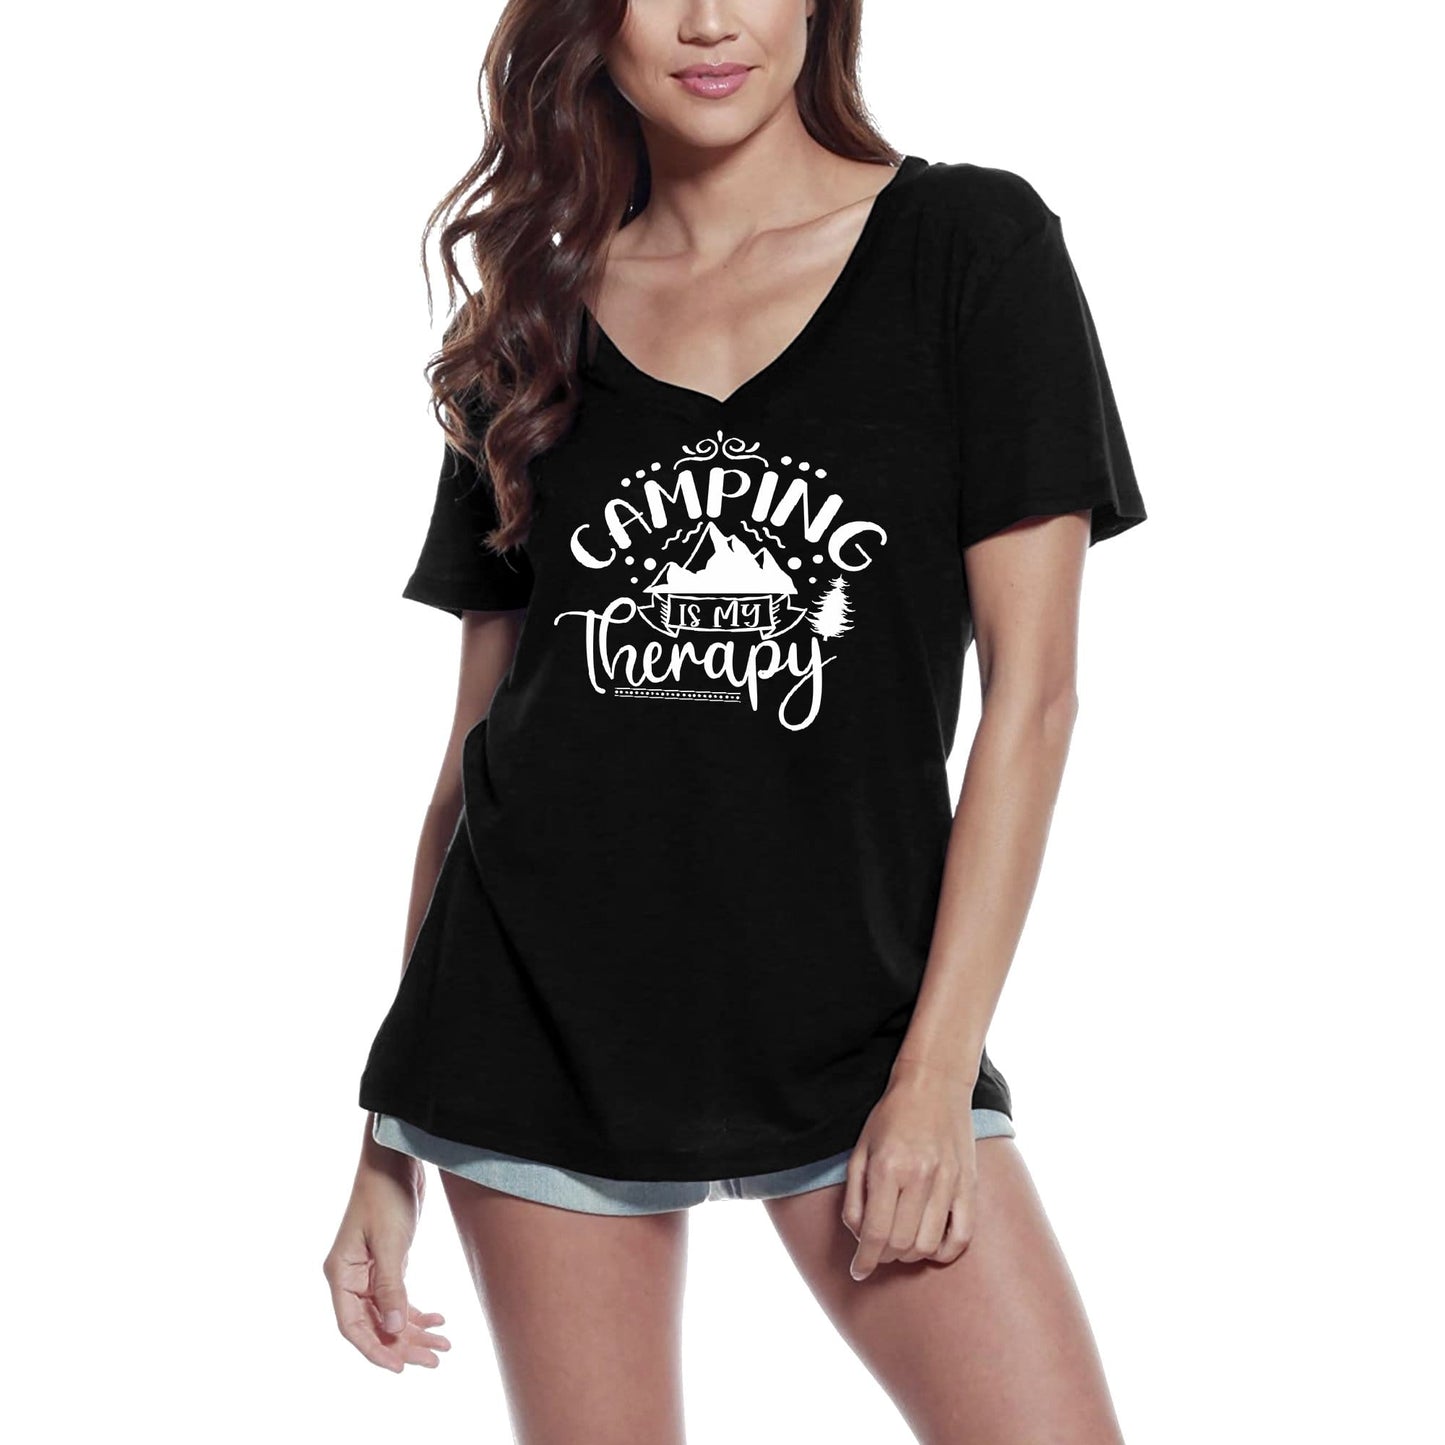 ULTRABASIC Women's T-Shirt Camping Is My Therapy - Funny Camp Tee Shirt